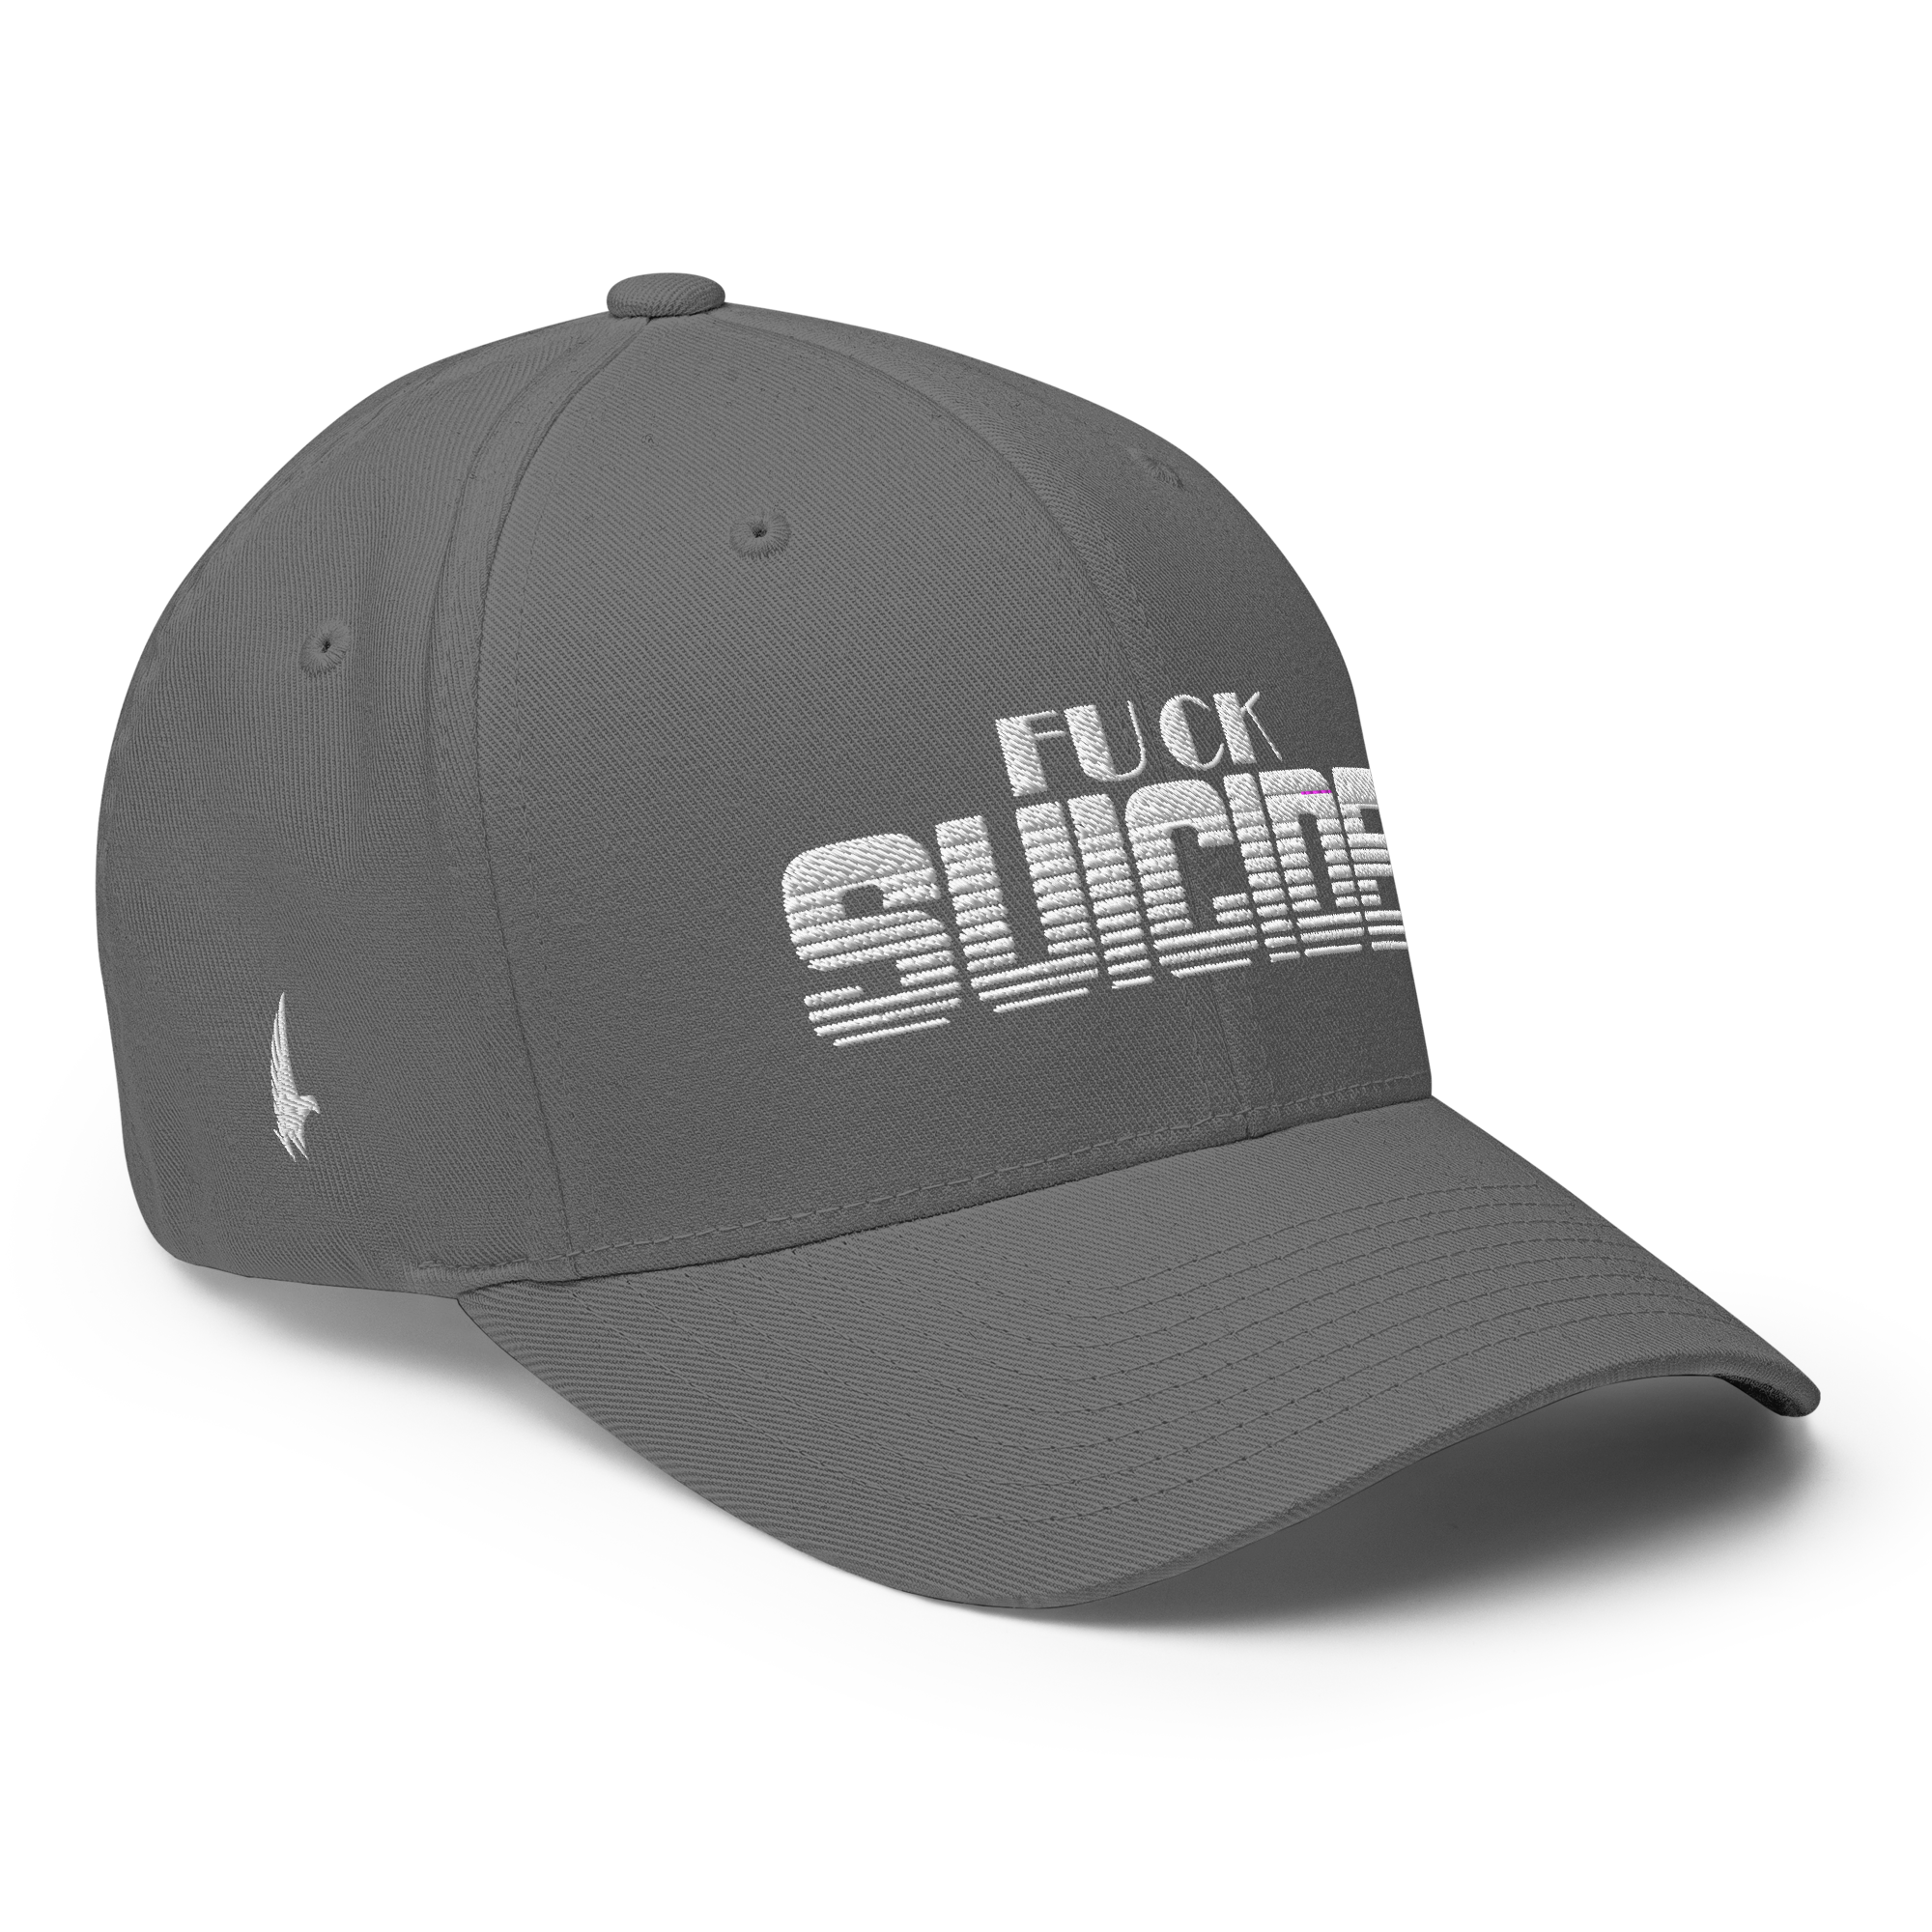 Fk Suicide Fitted Hat Grey Fitted - Loyalty Vibes